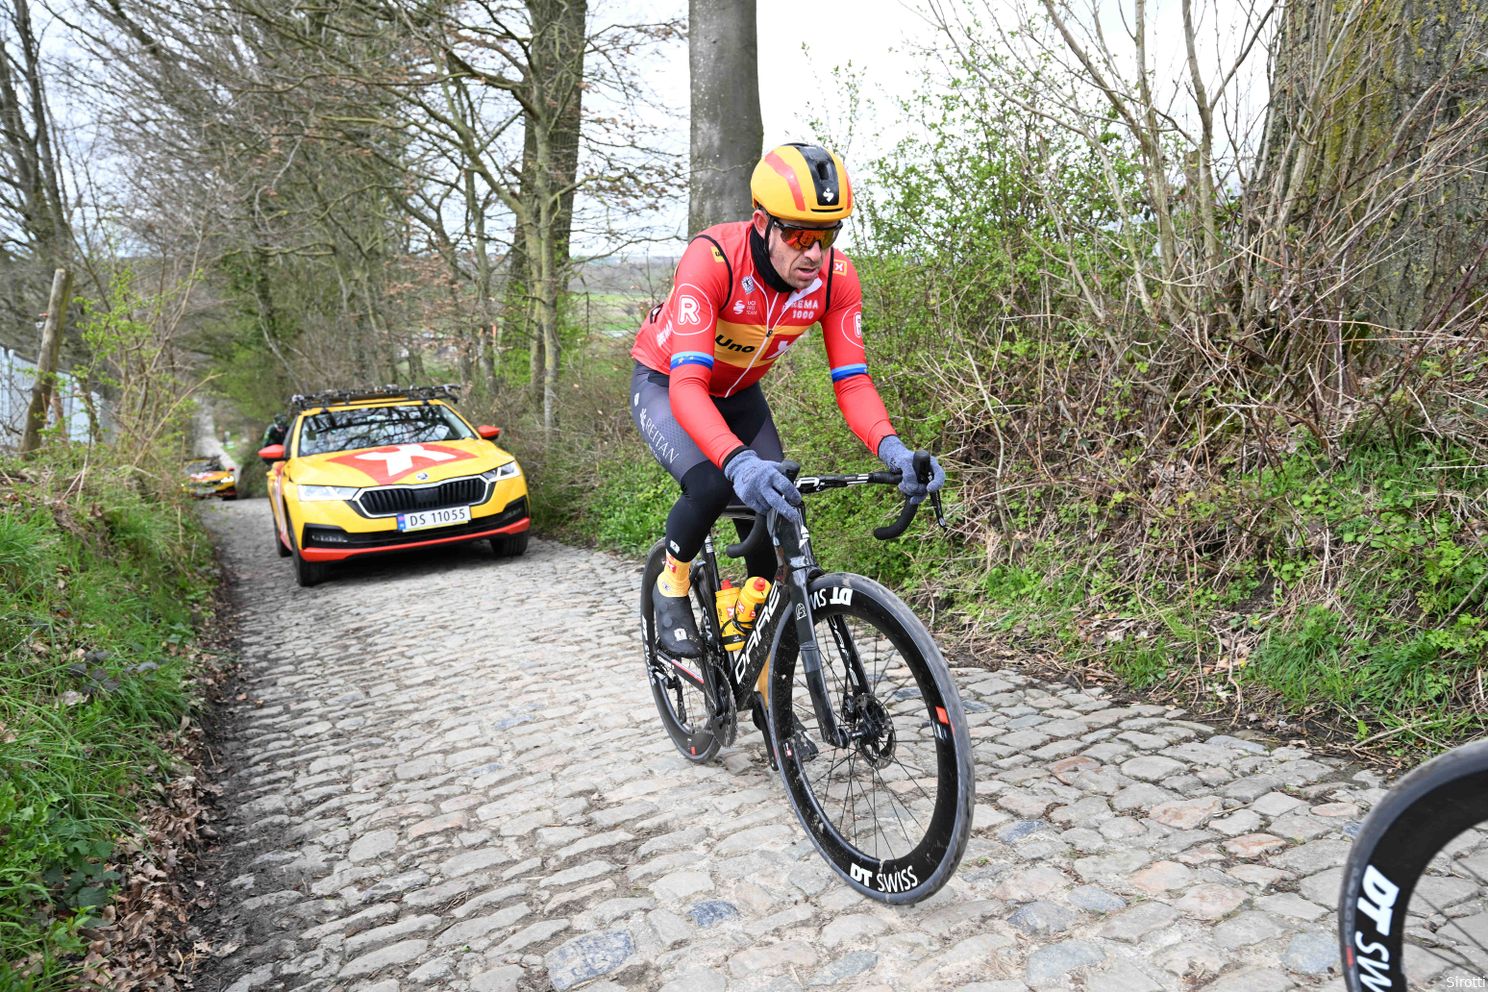 📸 Photos recon Tour of Flanders: not only the cyclists need to dismount at the Koppenberg!